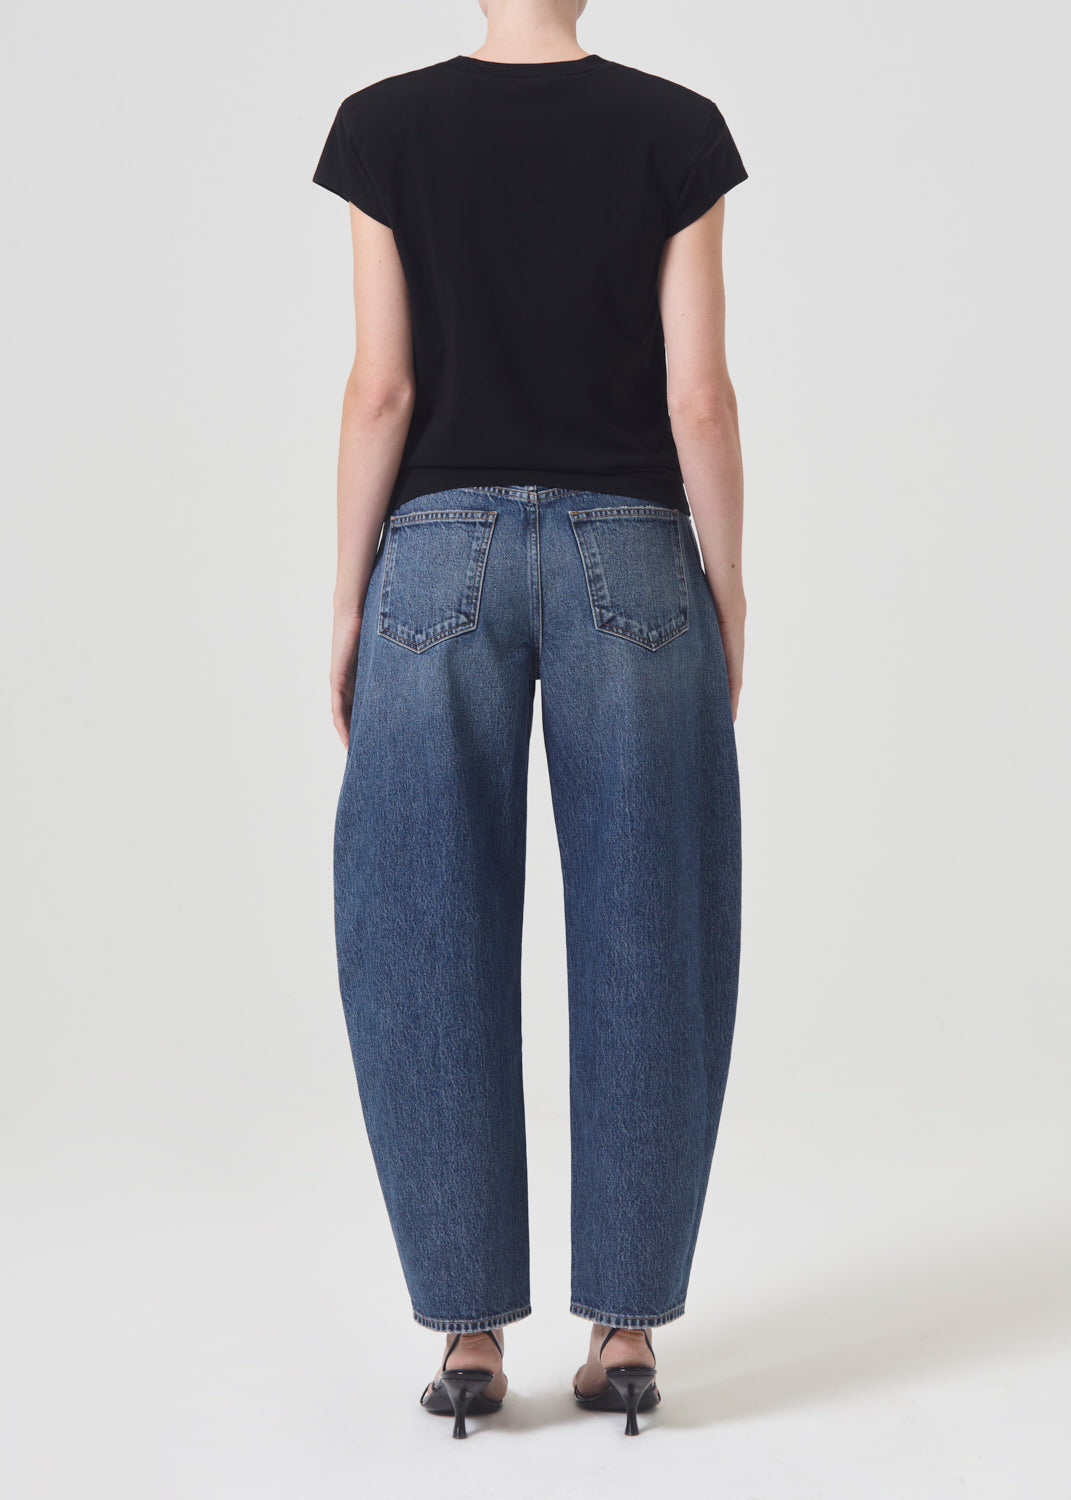 Agolde Balloon Ultra High Rise Curved Jean in Control available at The New Trend Australia